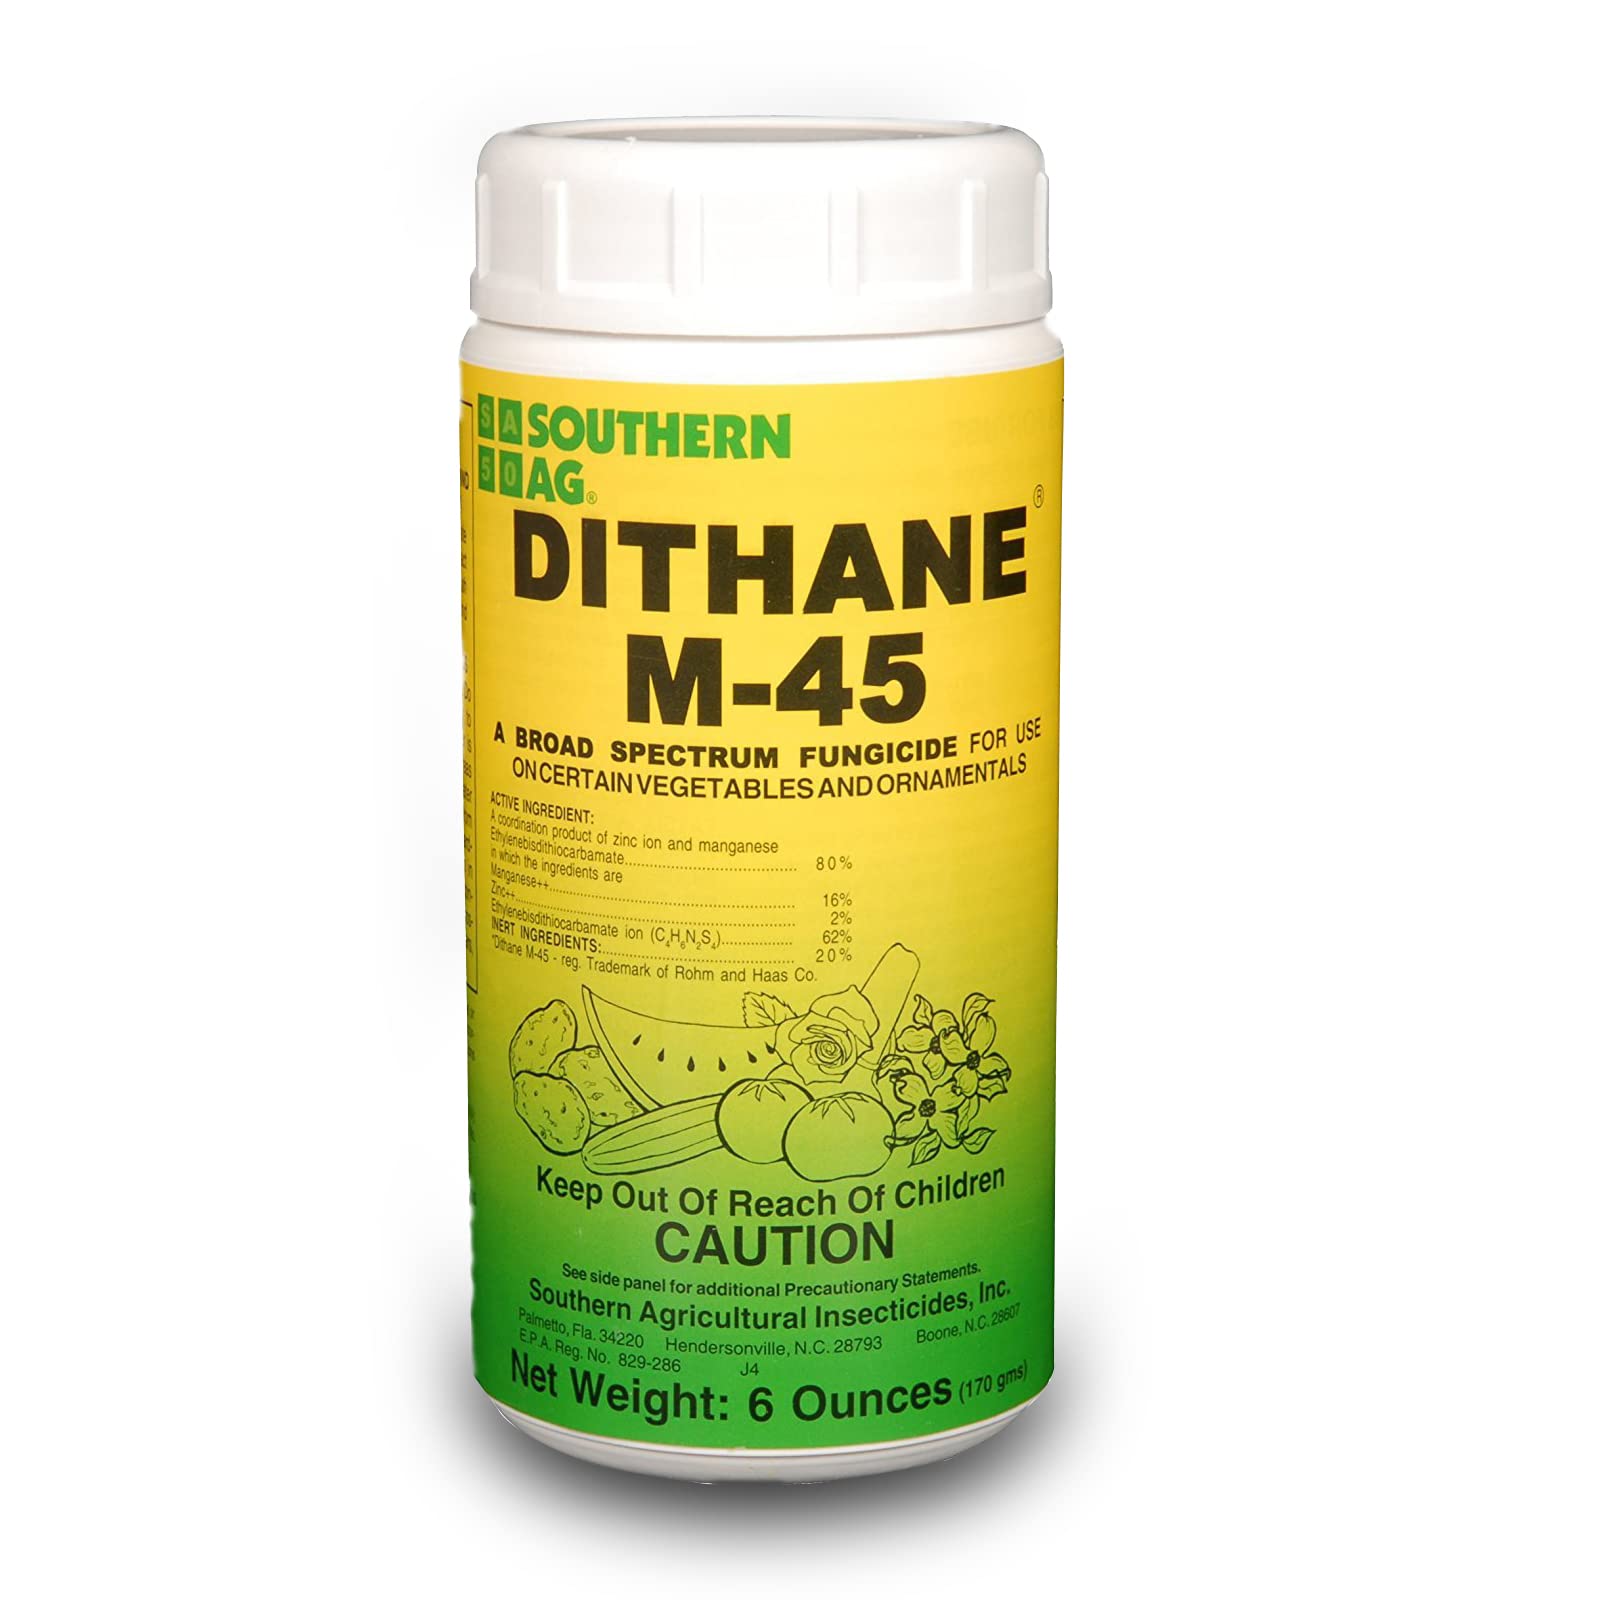 Southern Ag Dithane M-45 Fungicide- Lawn Fungus Control - Liquid Copper Fungicide - Copper Fungicide Powder - Leaf Spot Fungicide - Available with Premium Quality Centaurus AZ Gloves- 6oz.